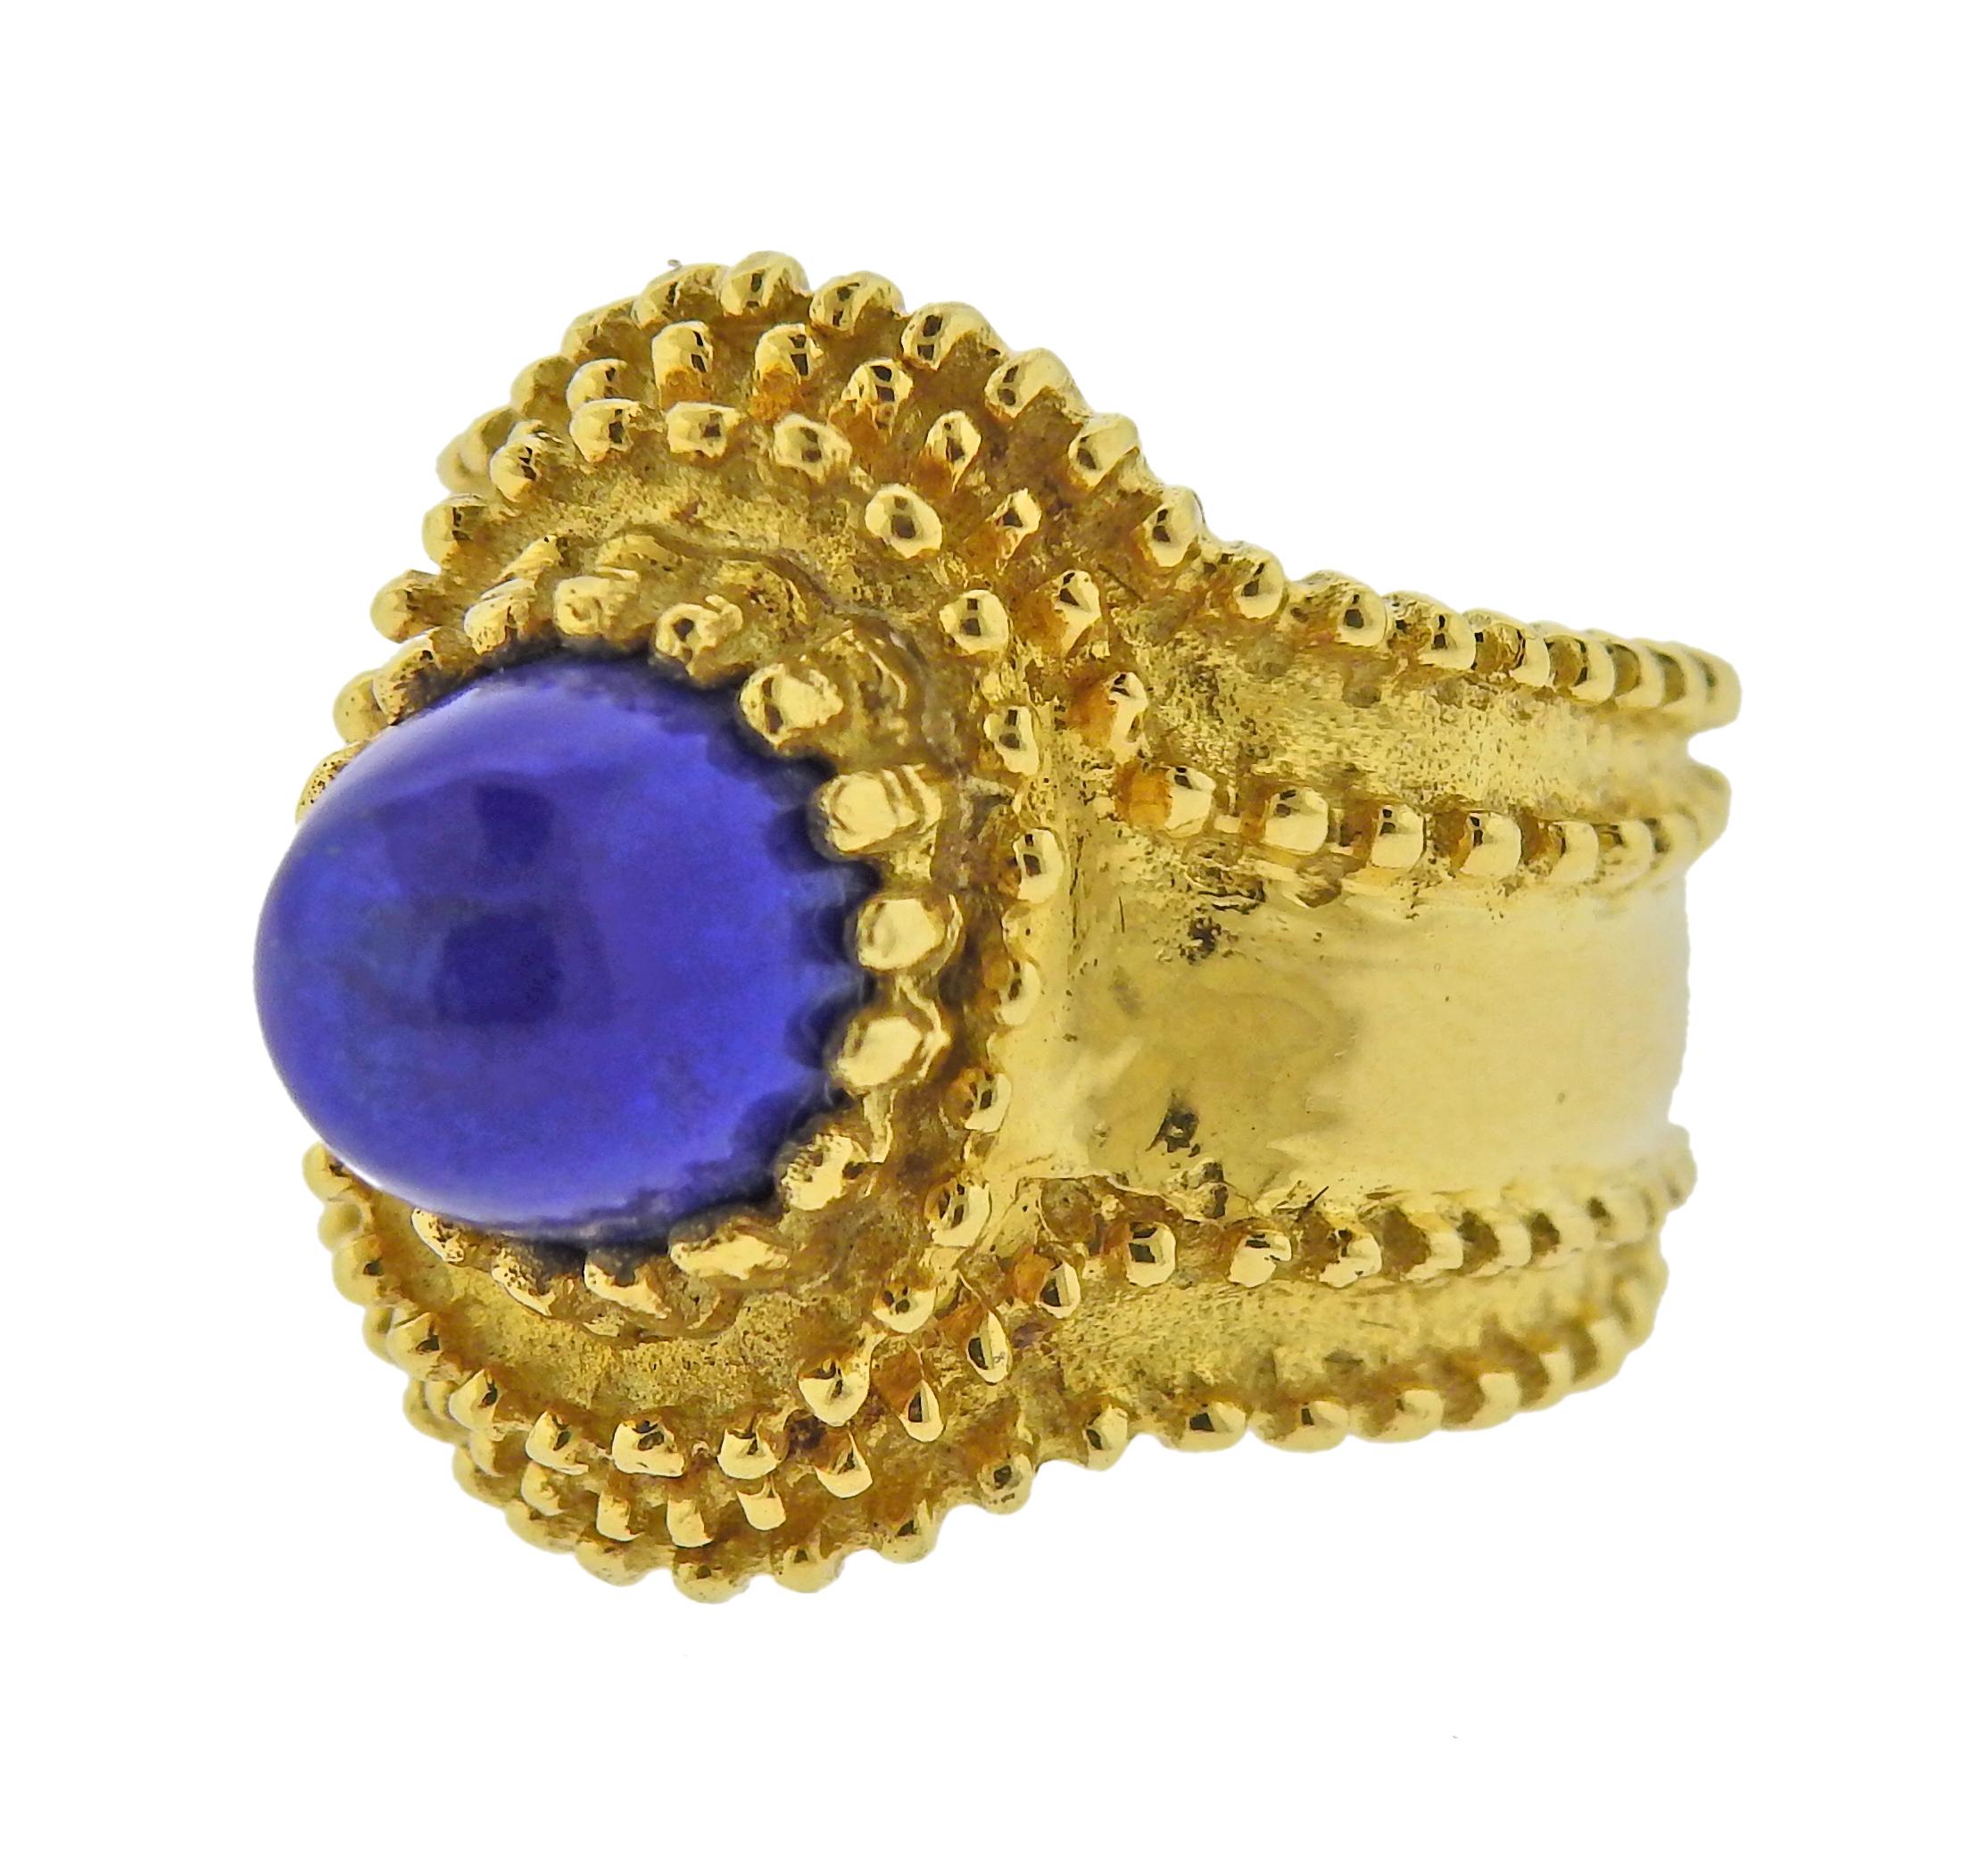 18k gold ring with lapis lazuli in the center. Ring size - 6, ring top - 20mm wide. Marked: 750 and Italian mark on the outside of the shank. Weight - 9.7 grams.